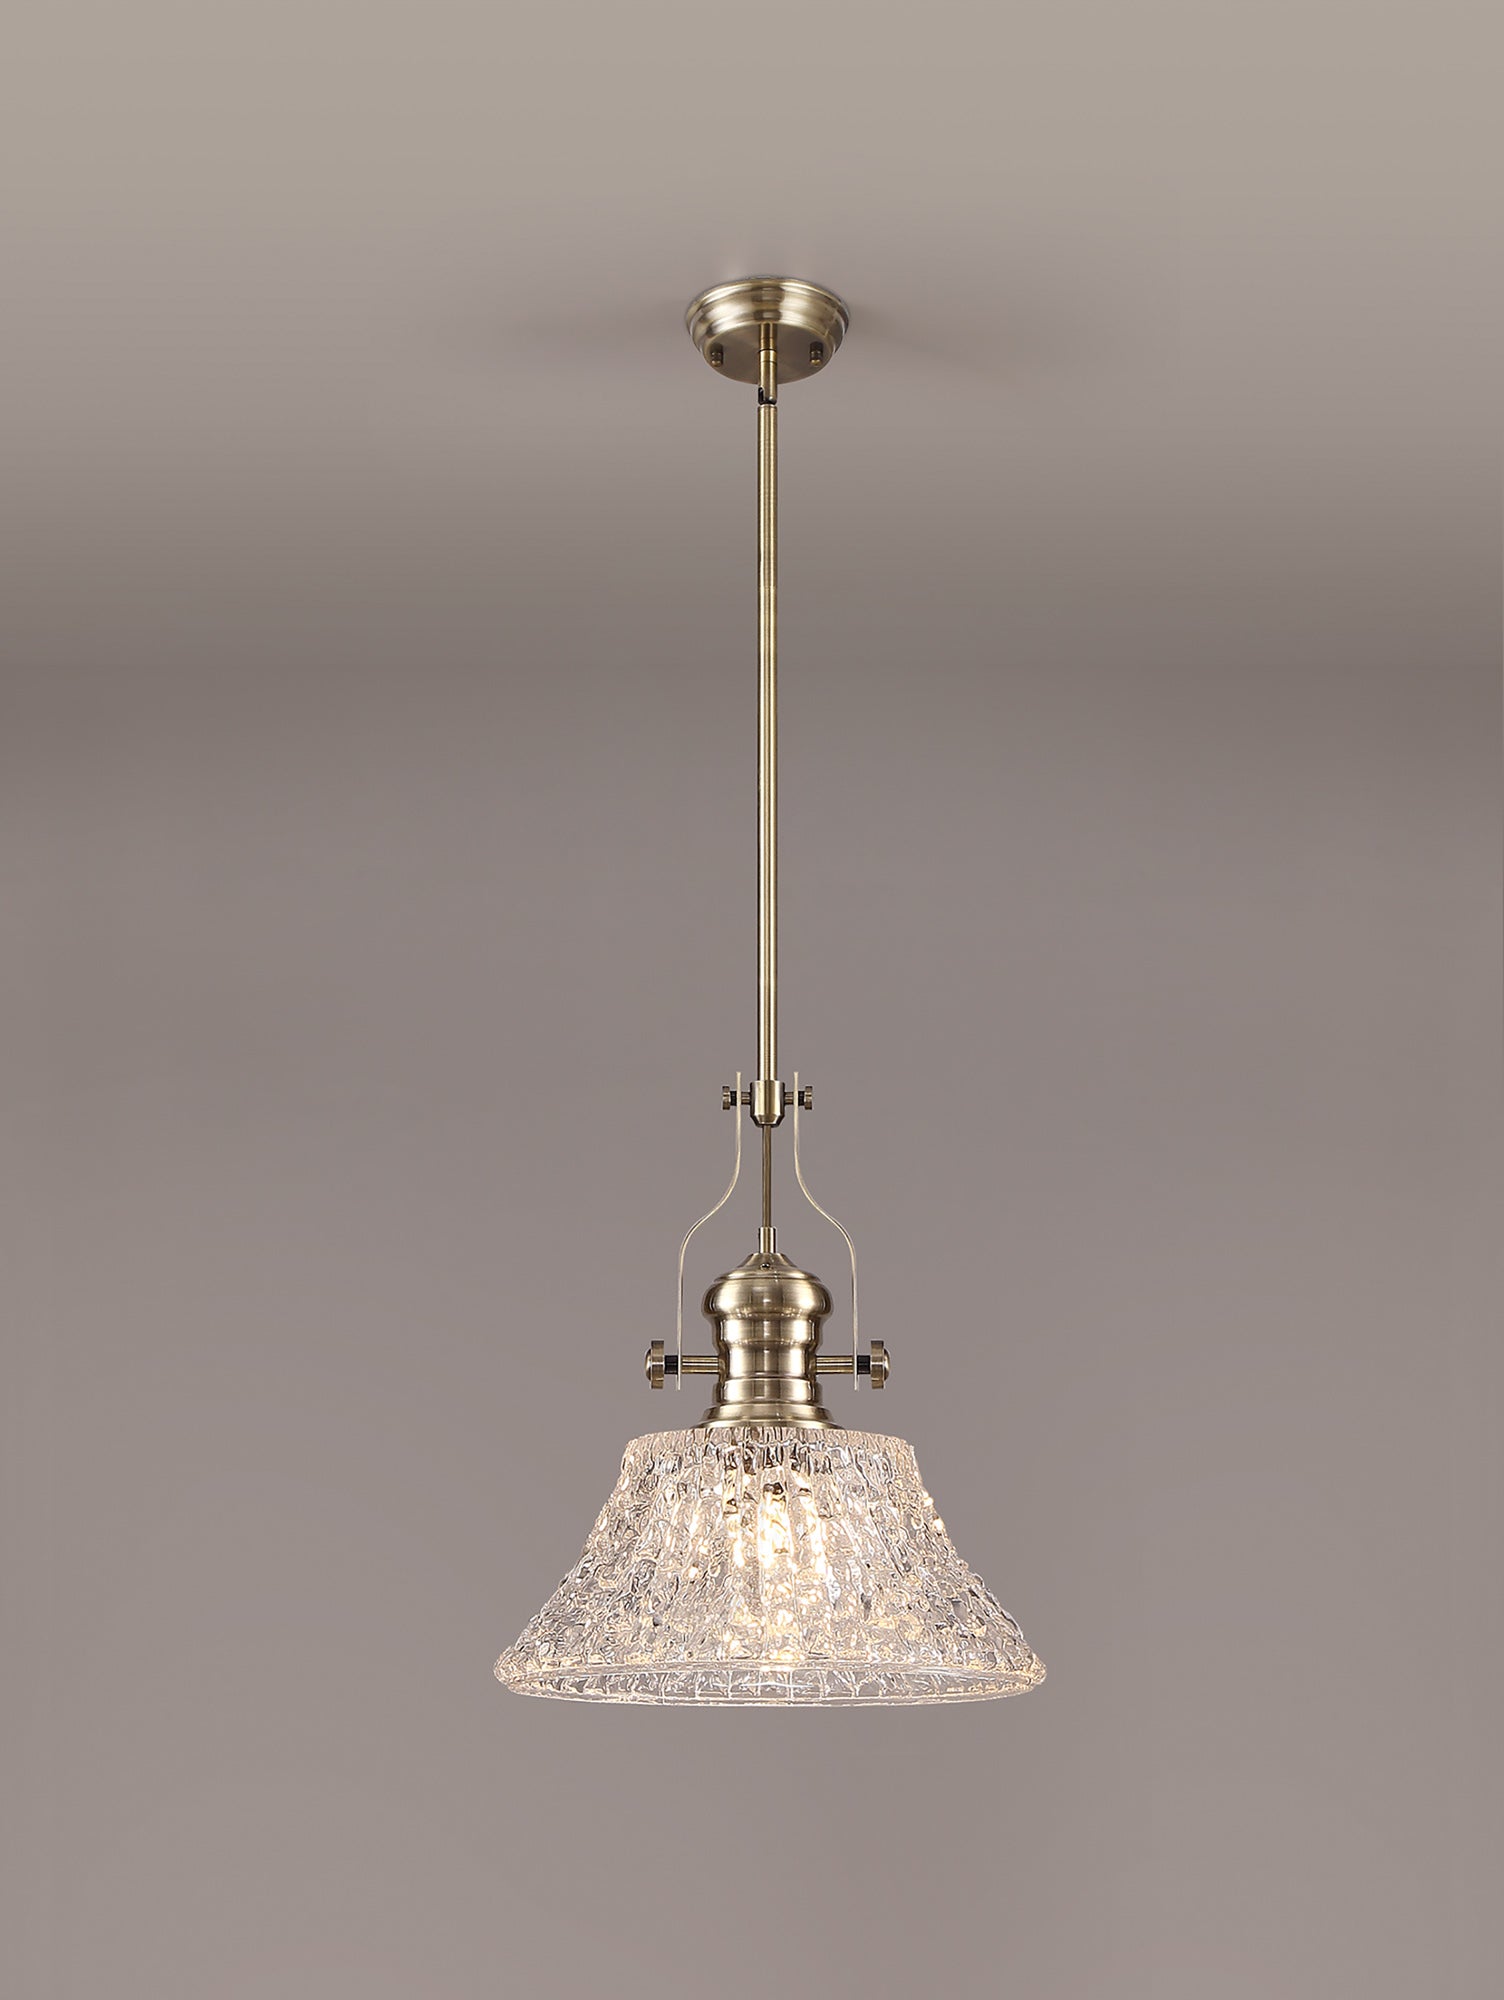 Docker Pendant With 38cm Patterned Round Shade, 1 x E27, Antique Brass/Clear Glass LOK104613